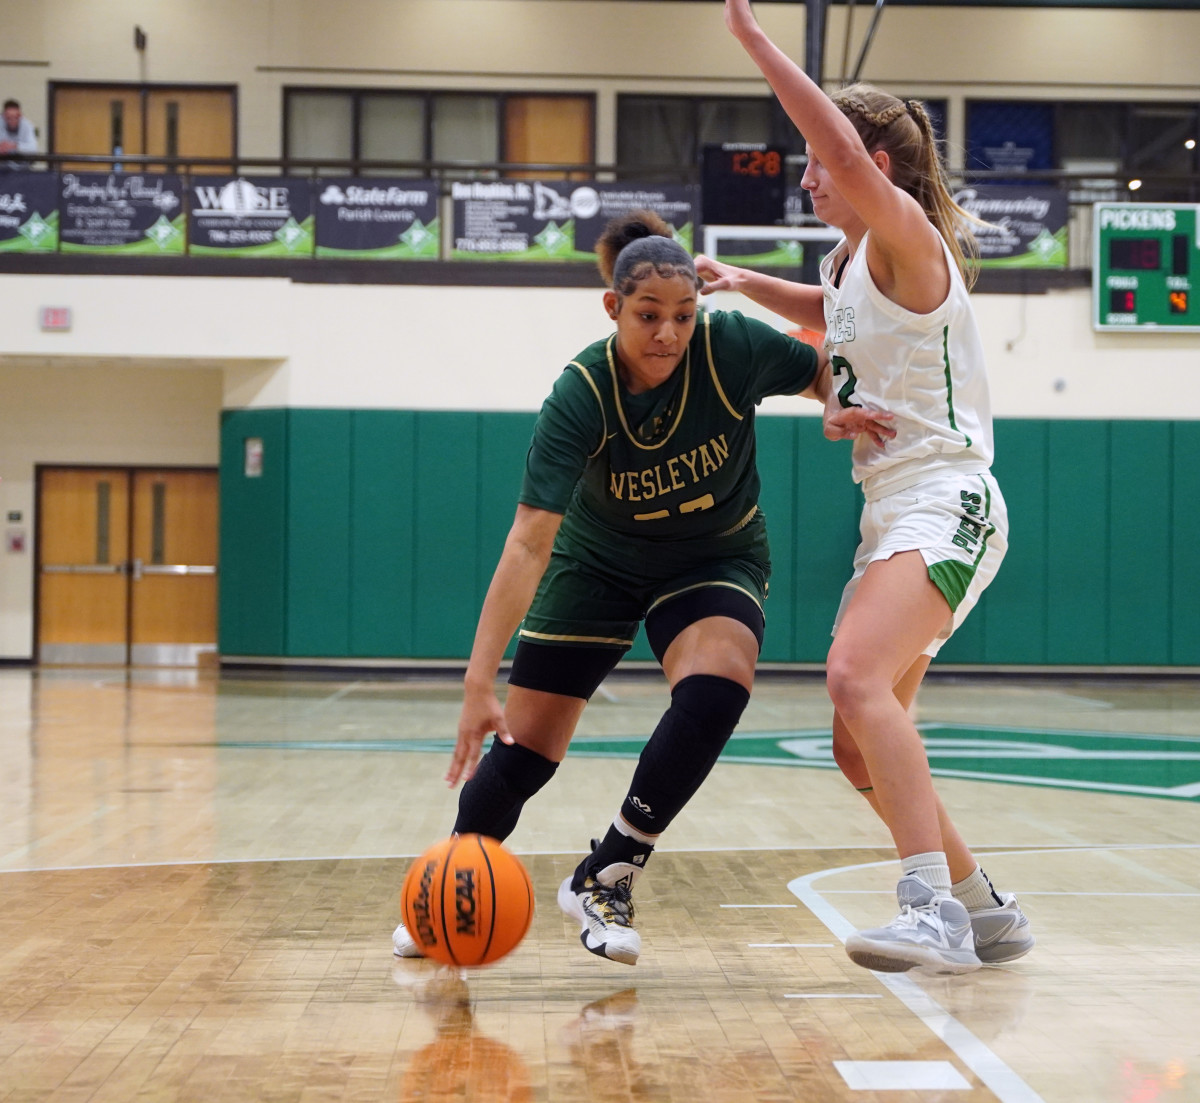 Desiree Davis drives toward the basket and puts pressure on the Dragonettes' defense. Davis and her teammates did damage close to the basket early and often in the team's 58-46 win.